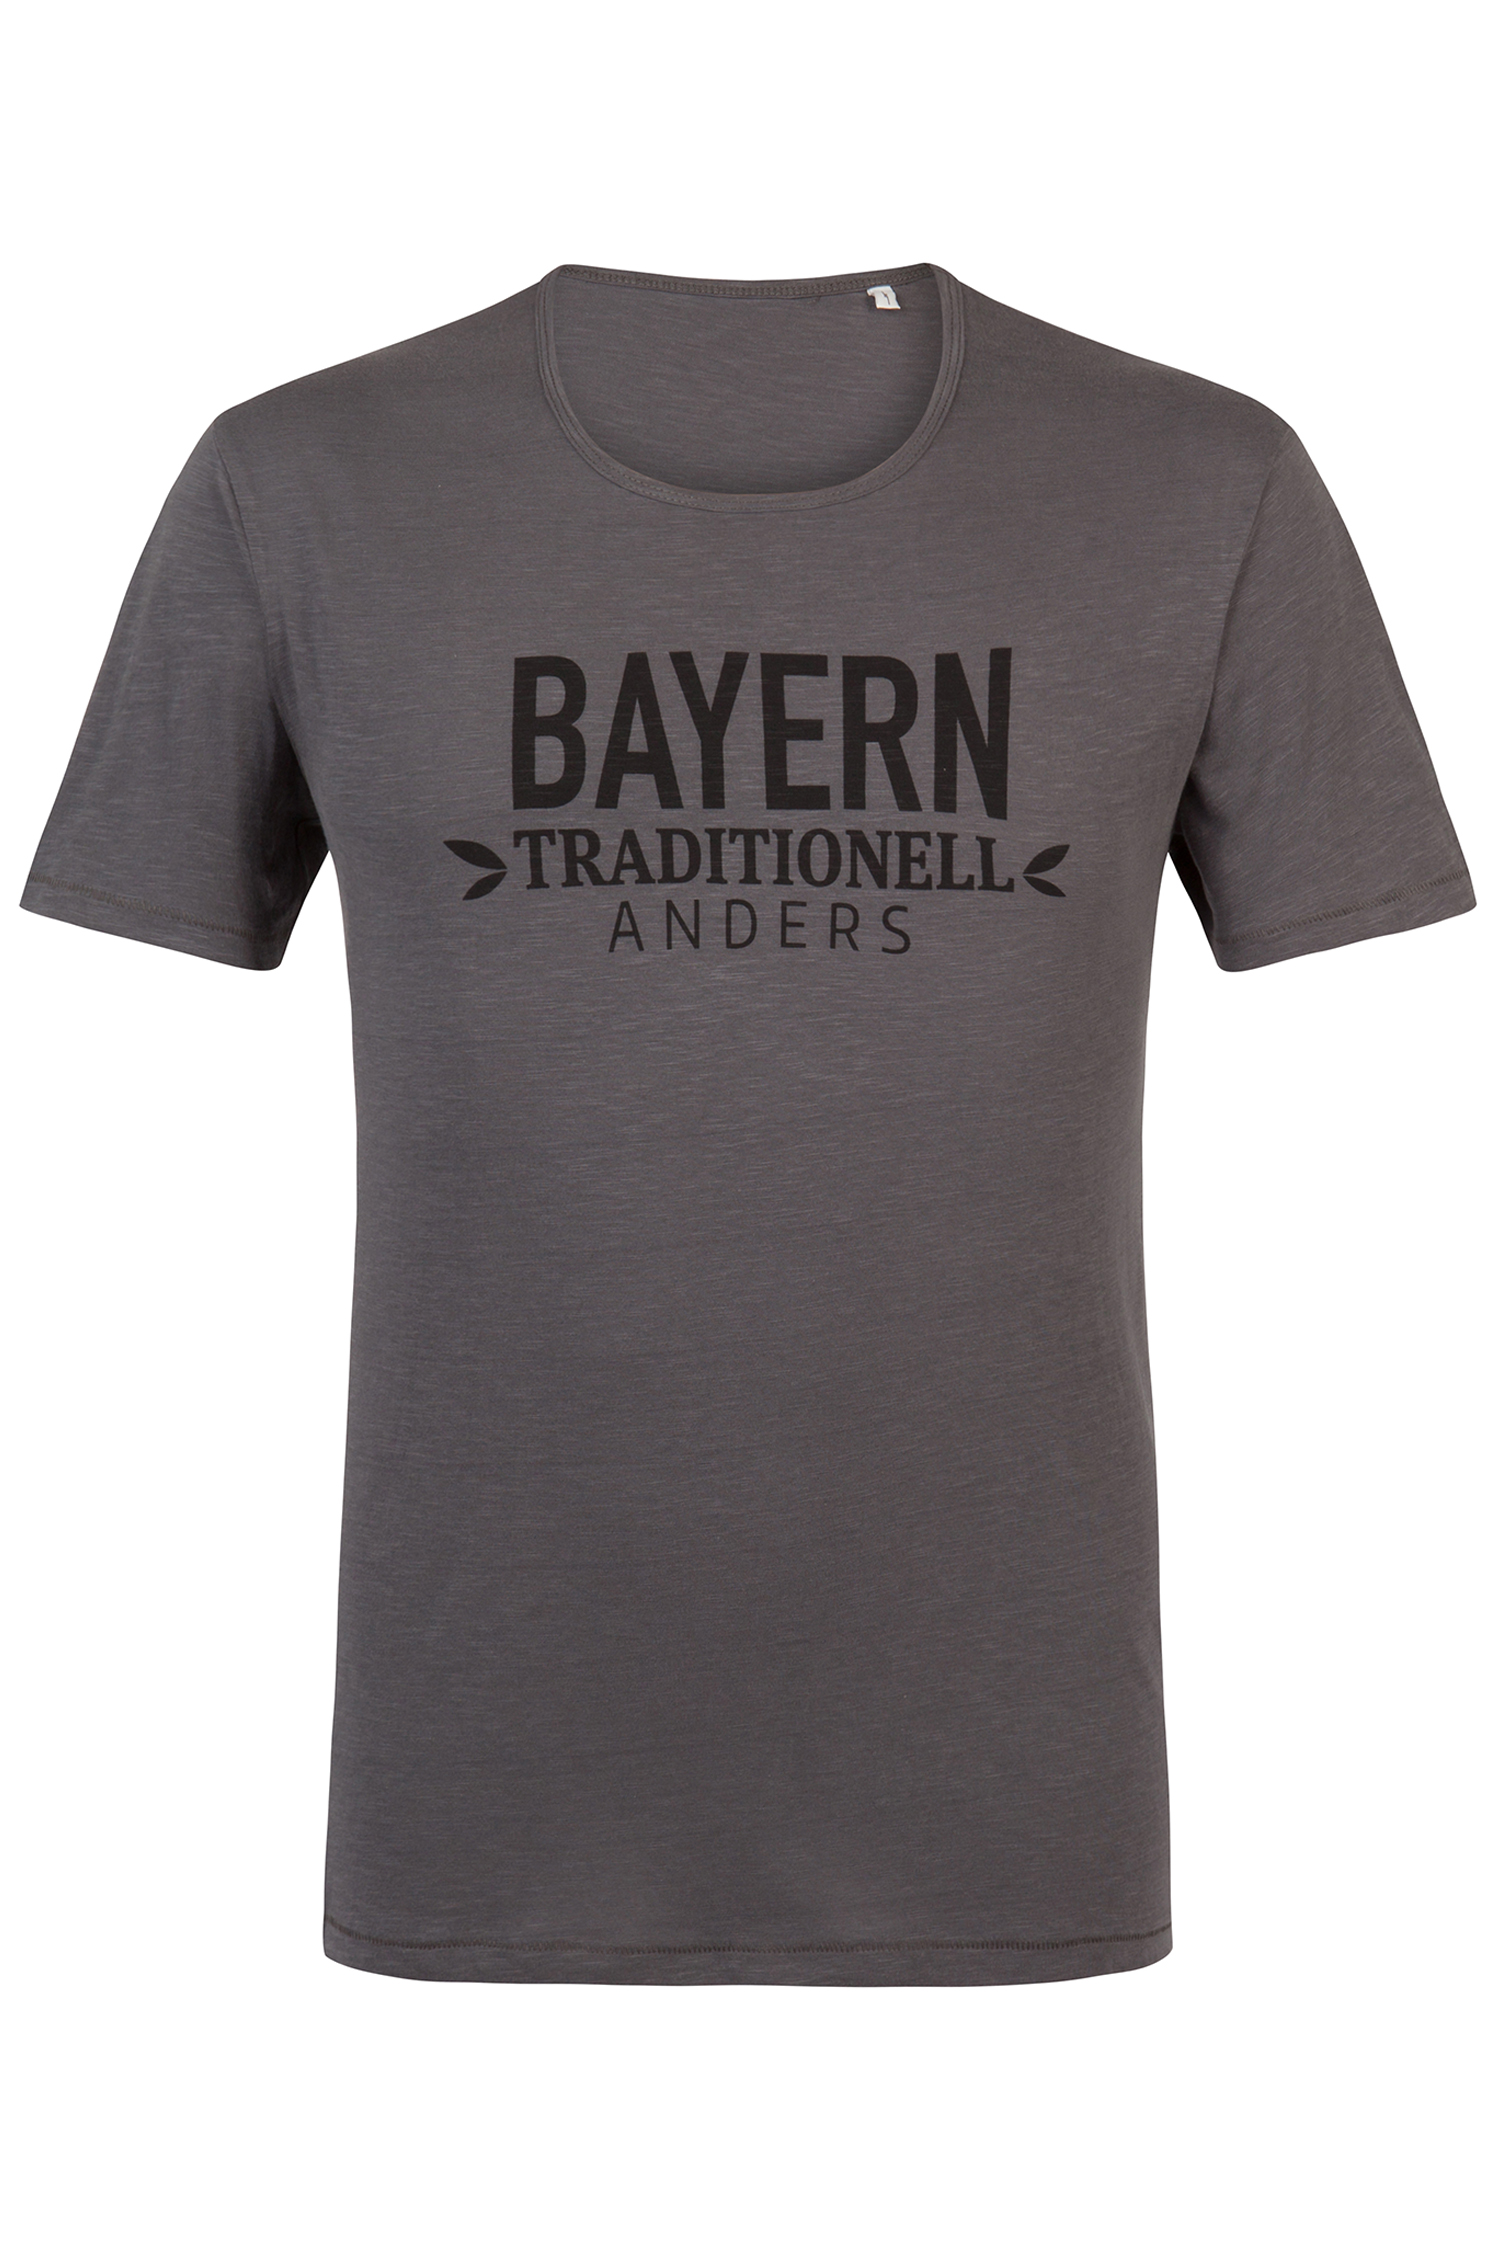 T-Shirt Bayern traditionell anders S | anthra / schwarz